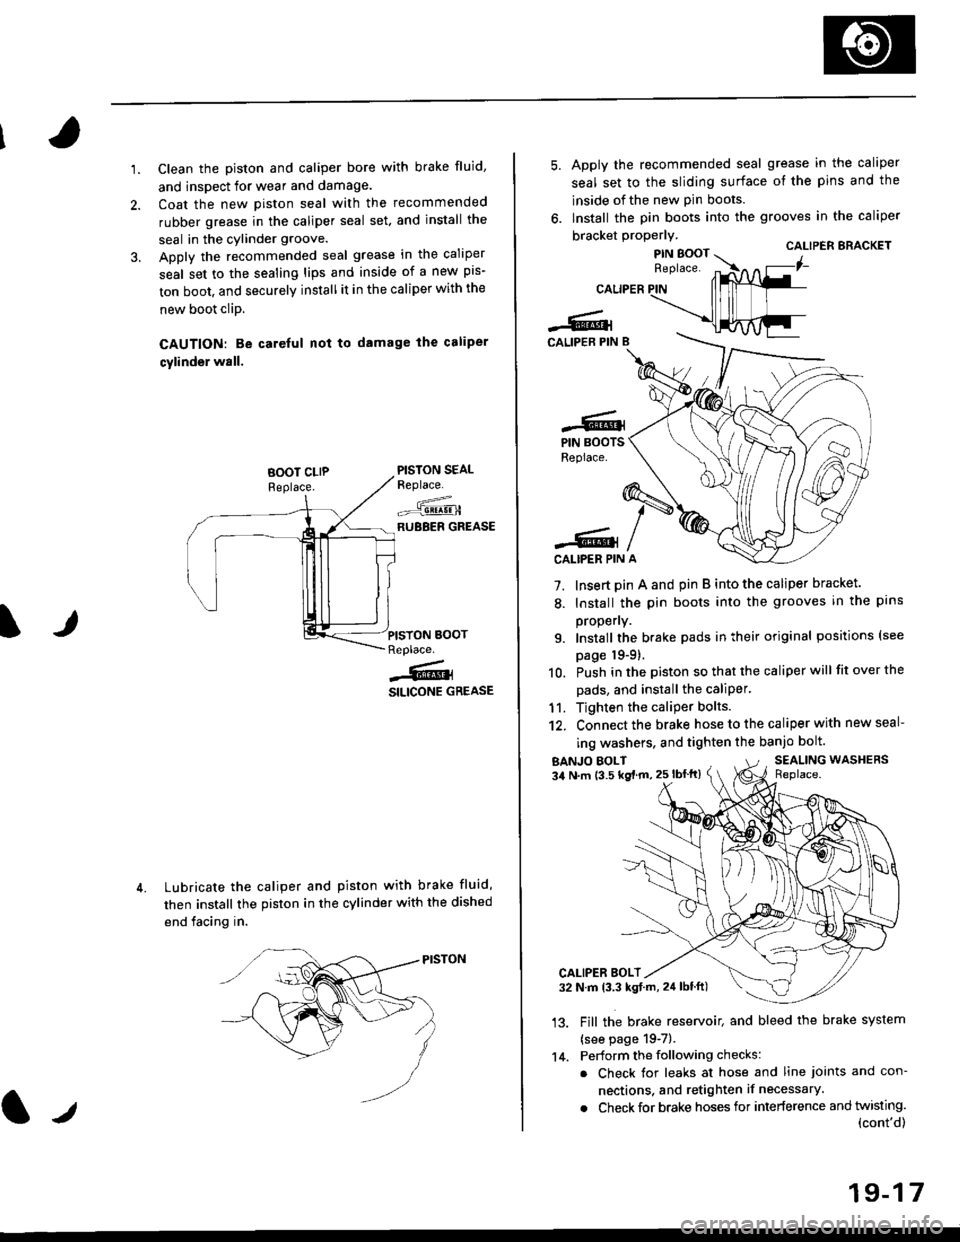 HONDA CIVIC 1997 6.G User Guide 1.Clean the piston and caliper bore with brake fluid,
and inspect for wear and damage.
Coat the new piston seal with the recommended
rubber grease in the caliper seal set. and install the
seal in the